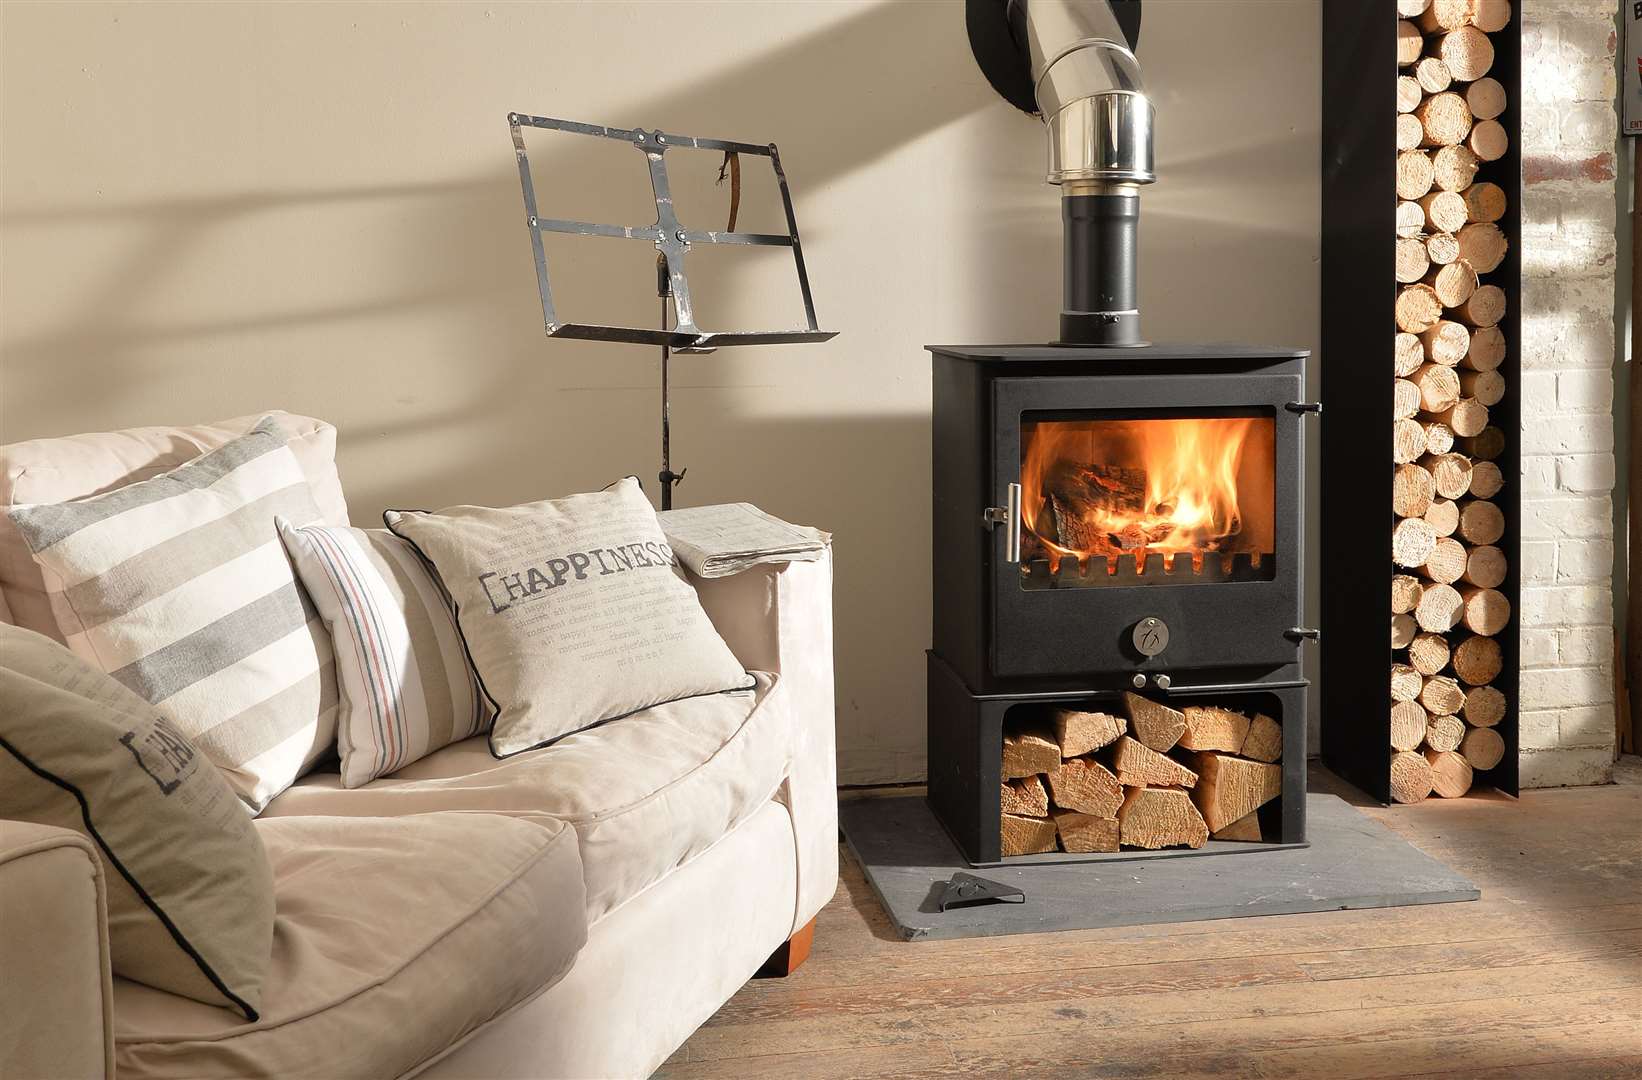 Grate Stoves & Fires is a family run stove and fireplace shop & fitters based in Aylesham near Canterbury.